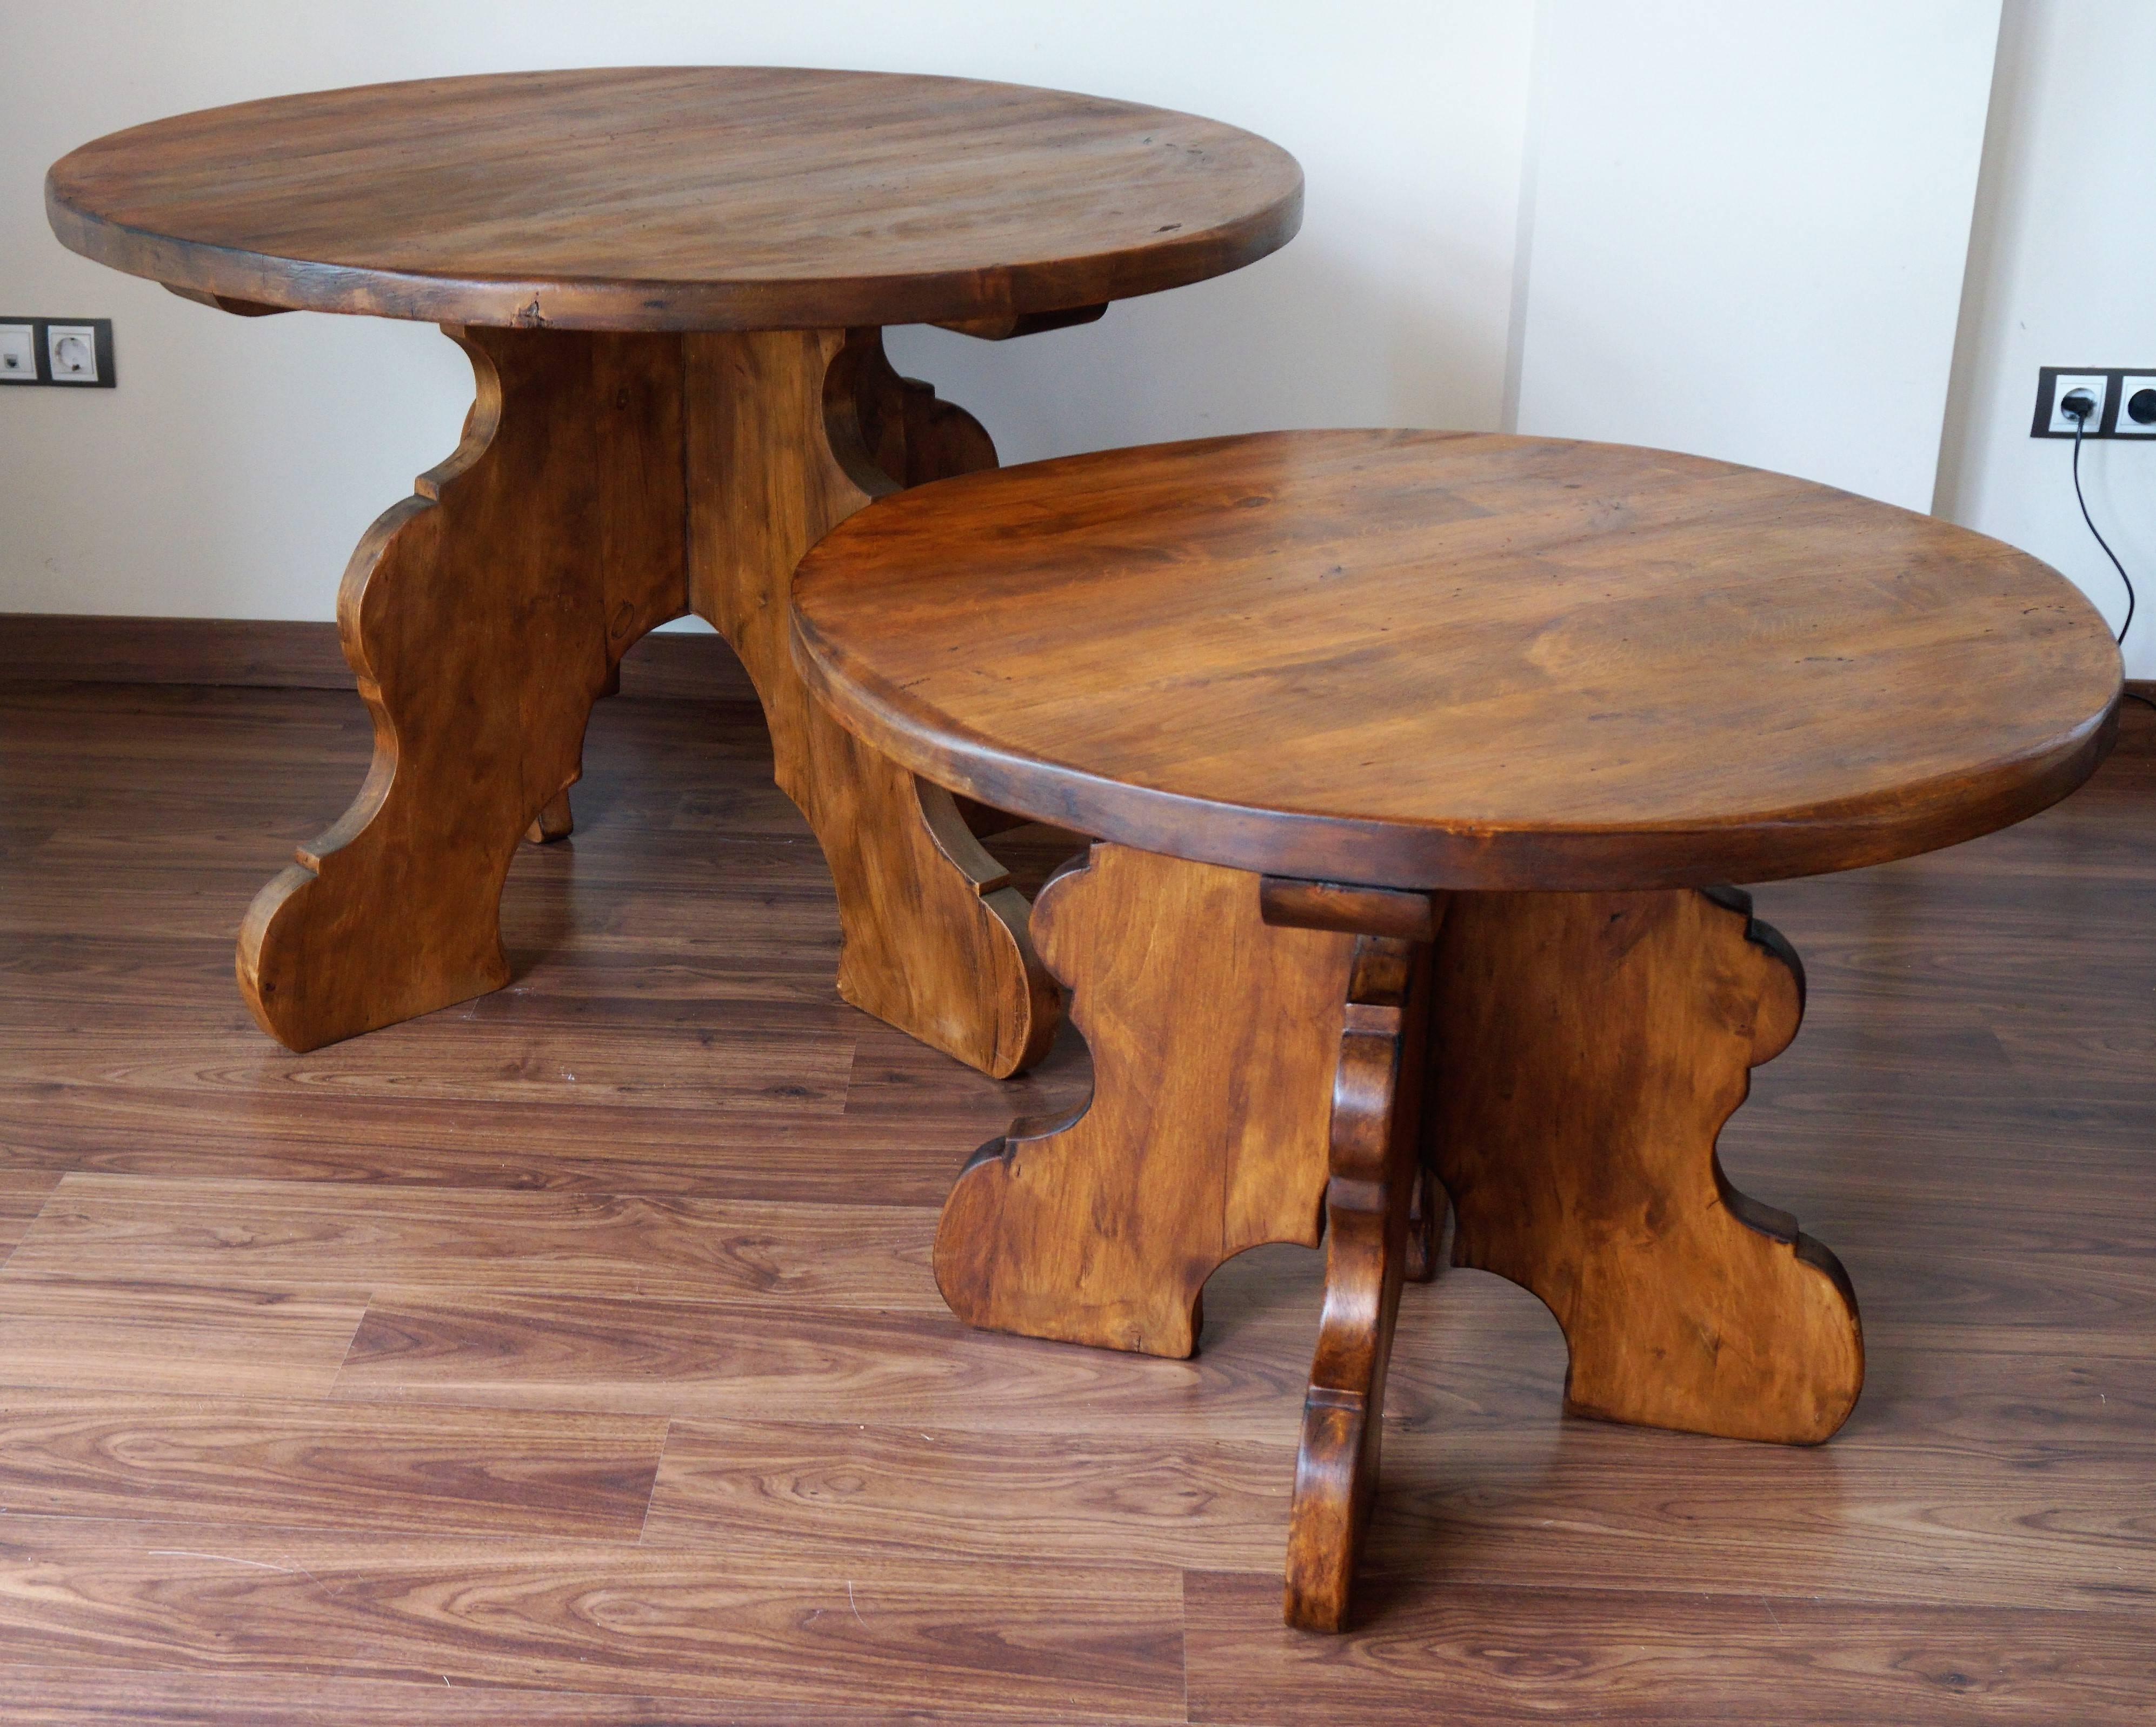 20th century pair of country tables with solid wood and beautiful patina.

Measurements:
Table 1: H:29.13 in  Diameter:43.3 in
Table 2: H:24 in  Diameter:33 in